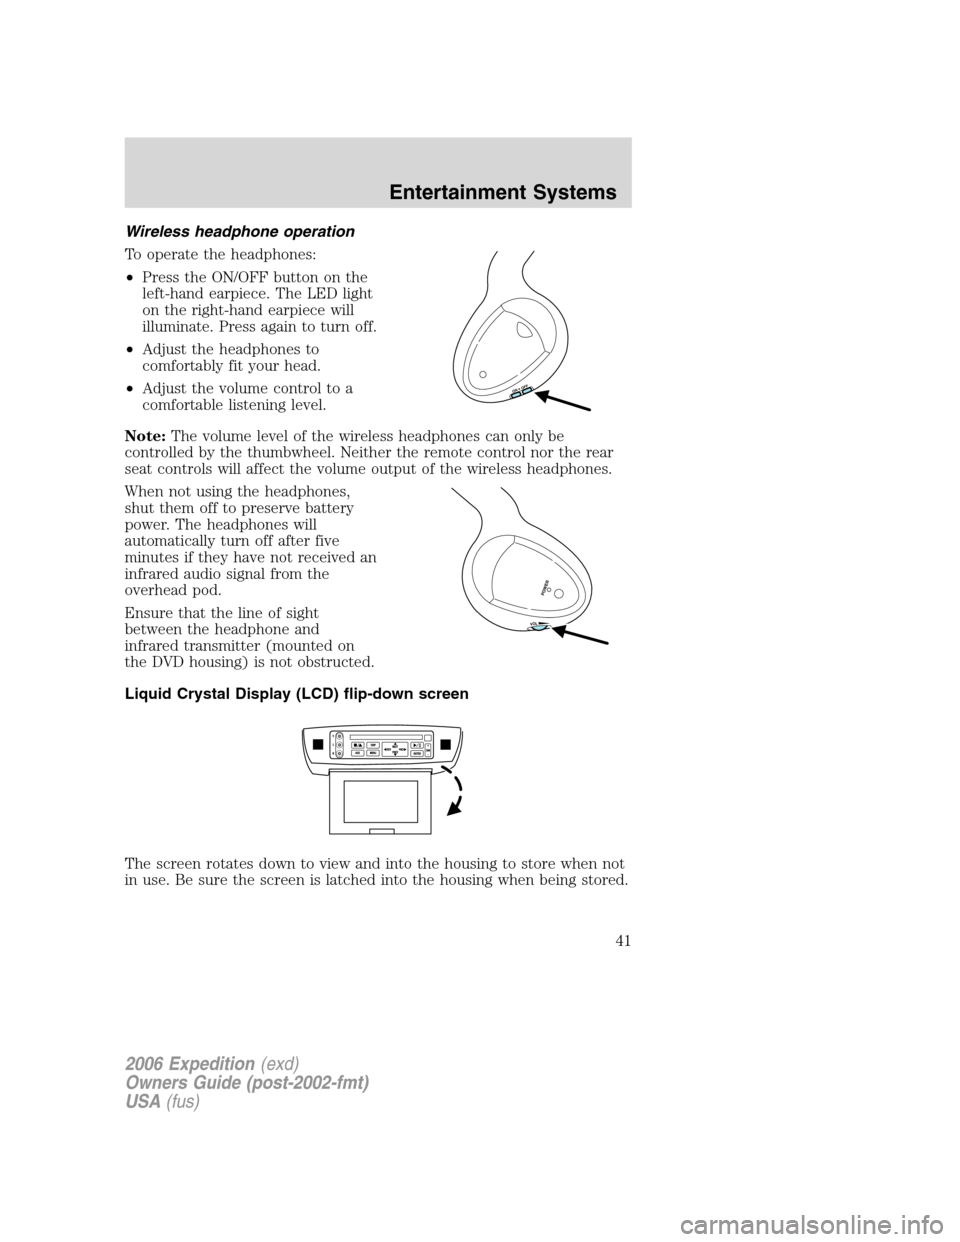 FORD EXPEDITION 2006 2.G Service Manual Wireless headphone operation
To operate the headphones:
•Press the ON/OFF button on the
left-hand earpiece. The LED light
on the right-hand earpiece will
illuminate. Press again to turn off.
•Adju